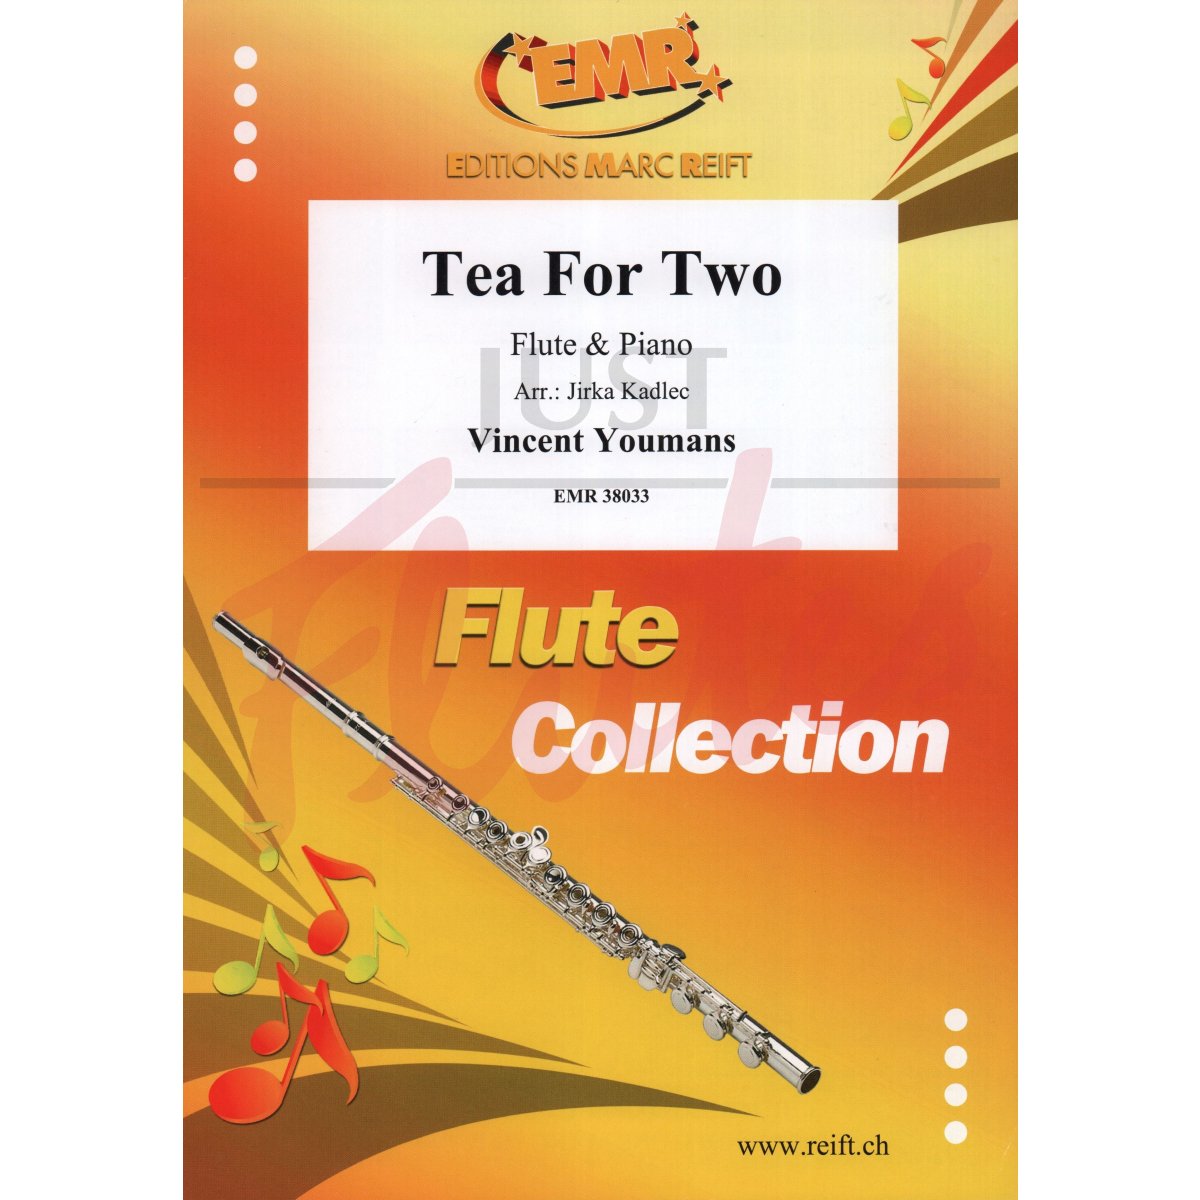 Tea for Two for Flute and Piano